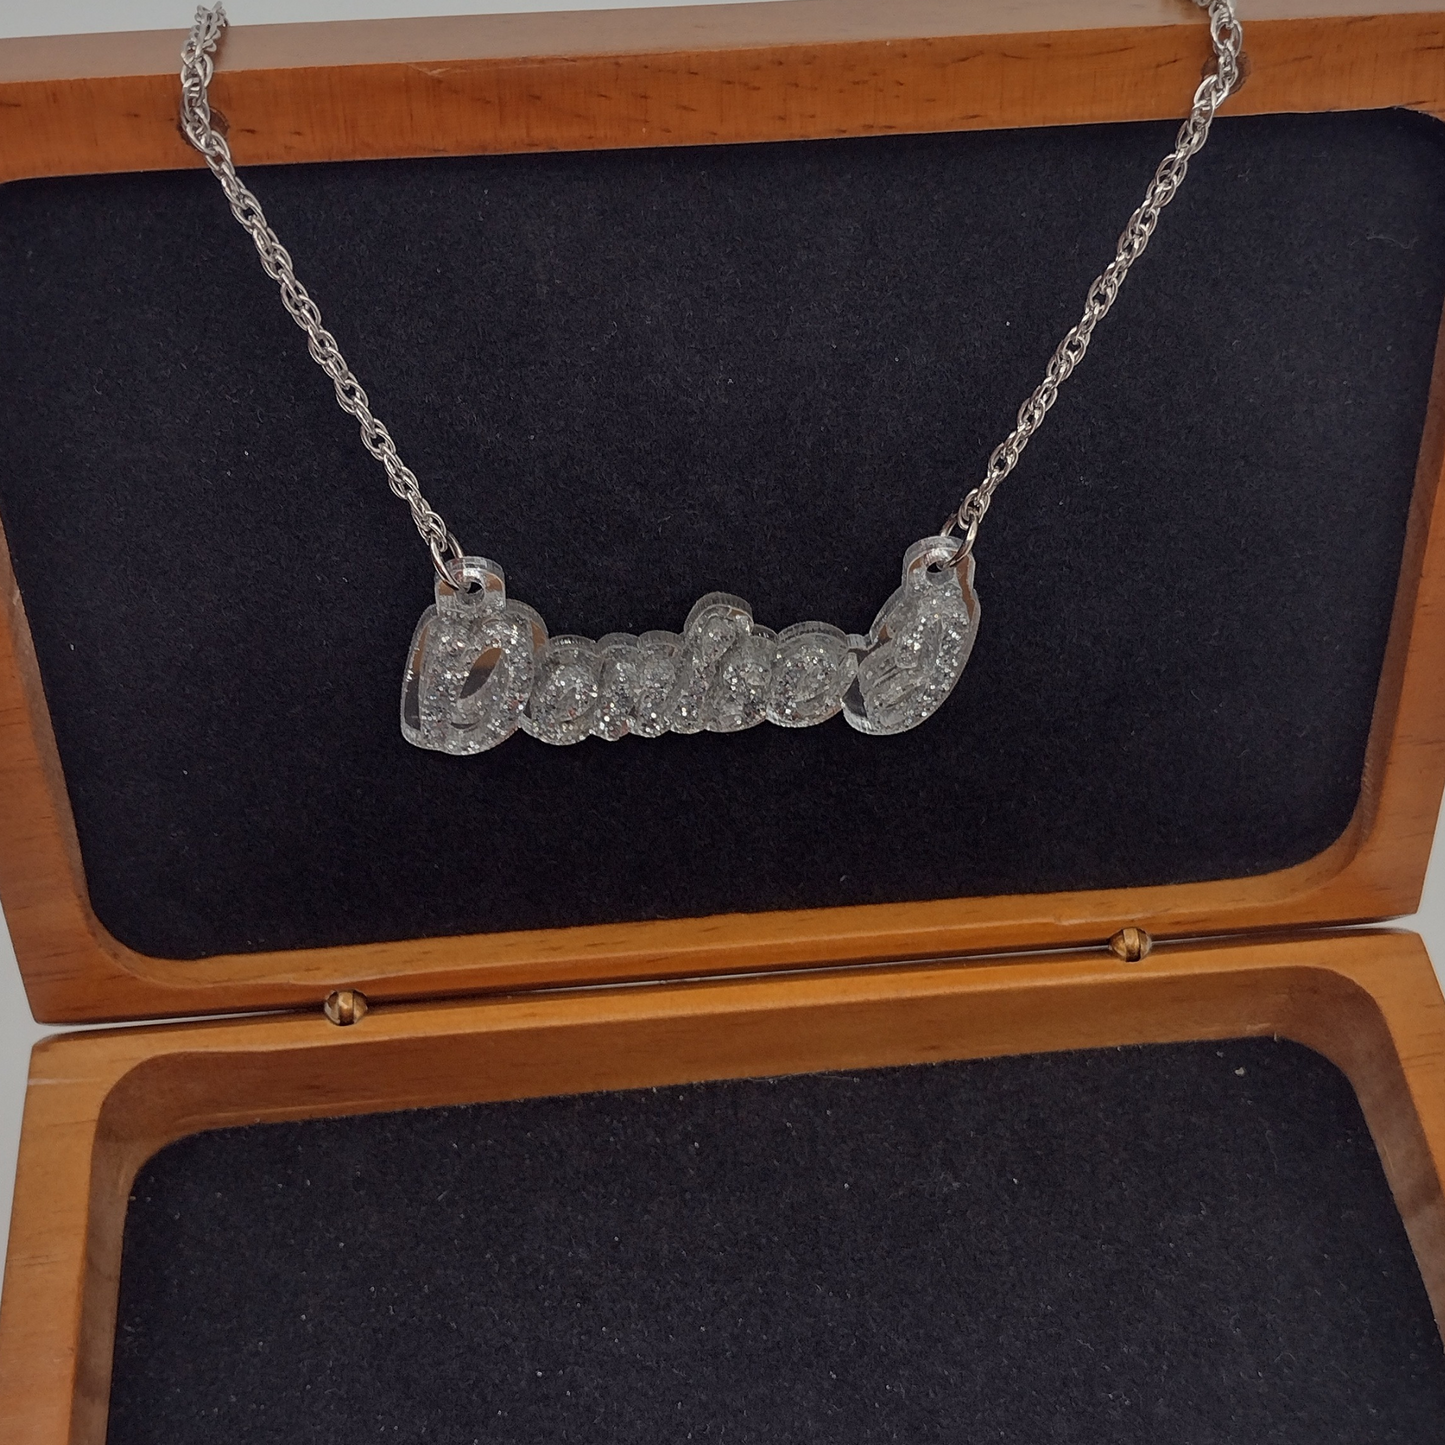 Custom Name and Background Necklace, Script Glitter Letters